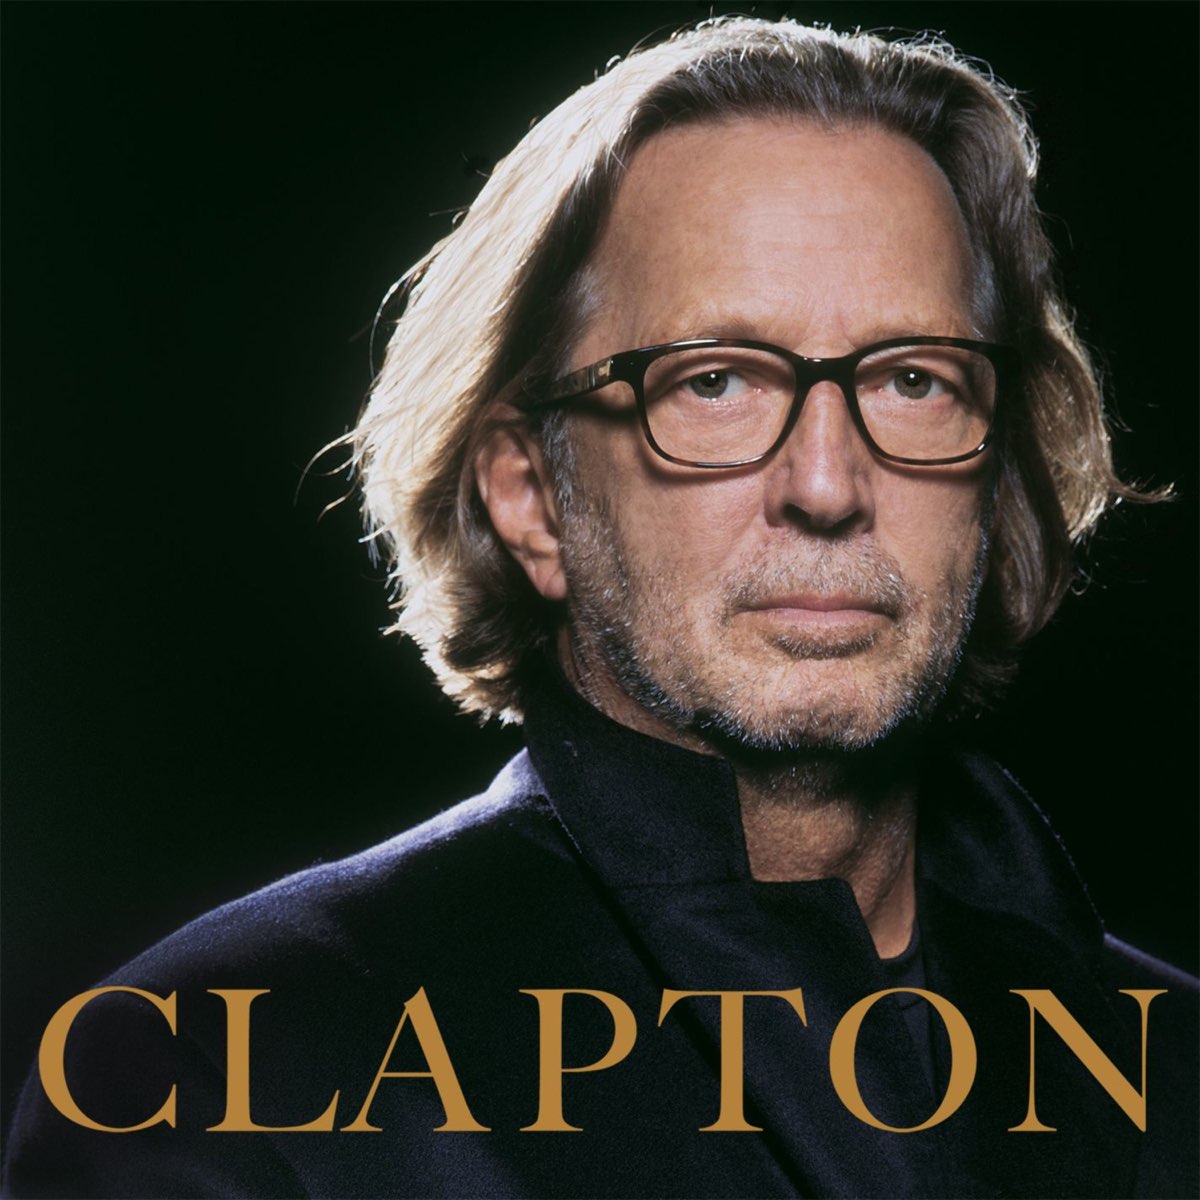 ‎Clapton by Eric Clapton on Apple Music